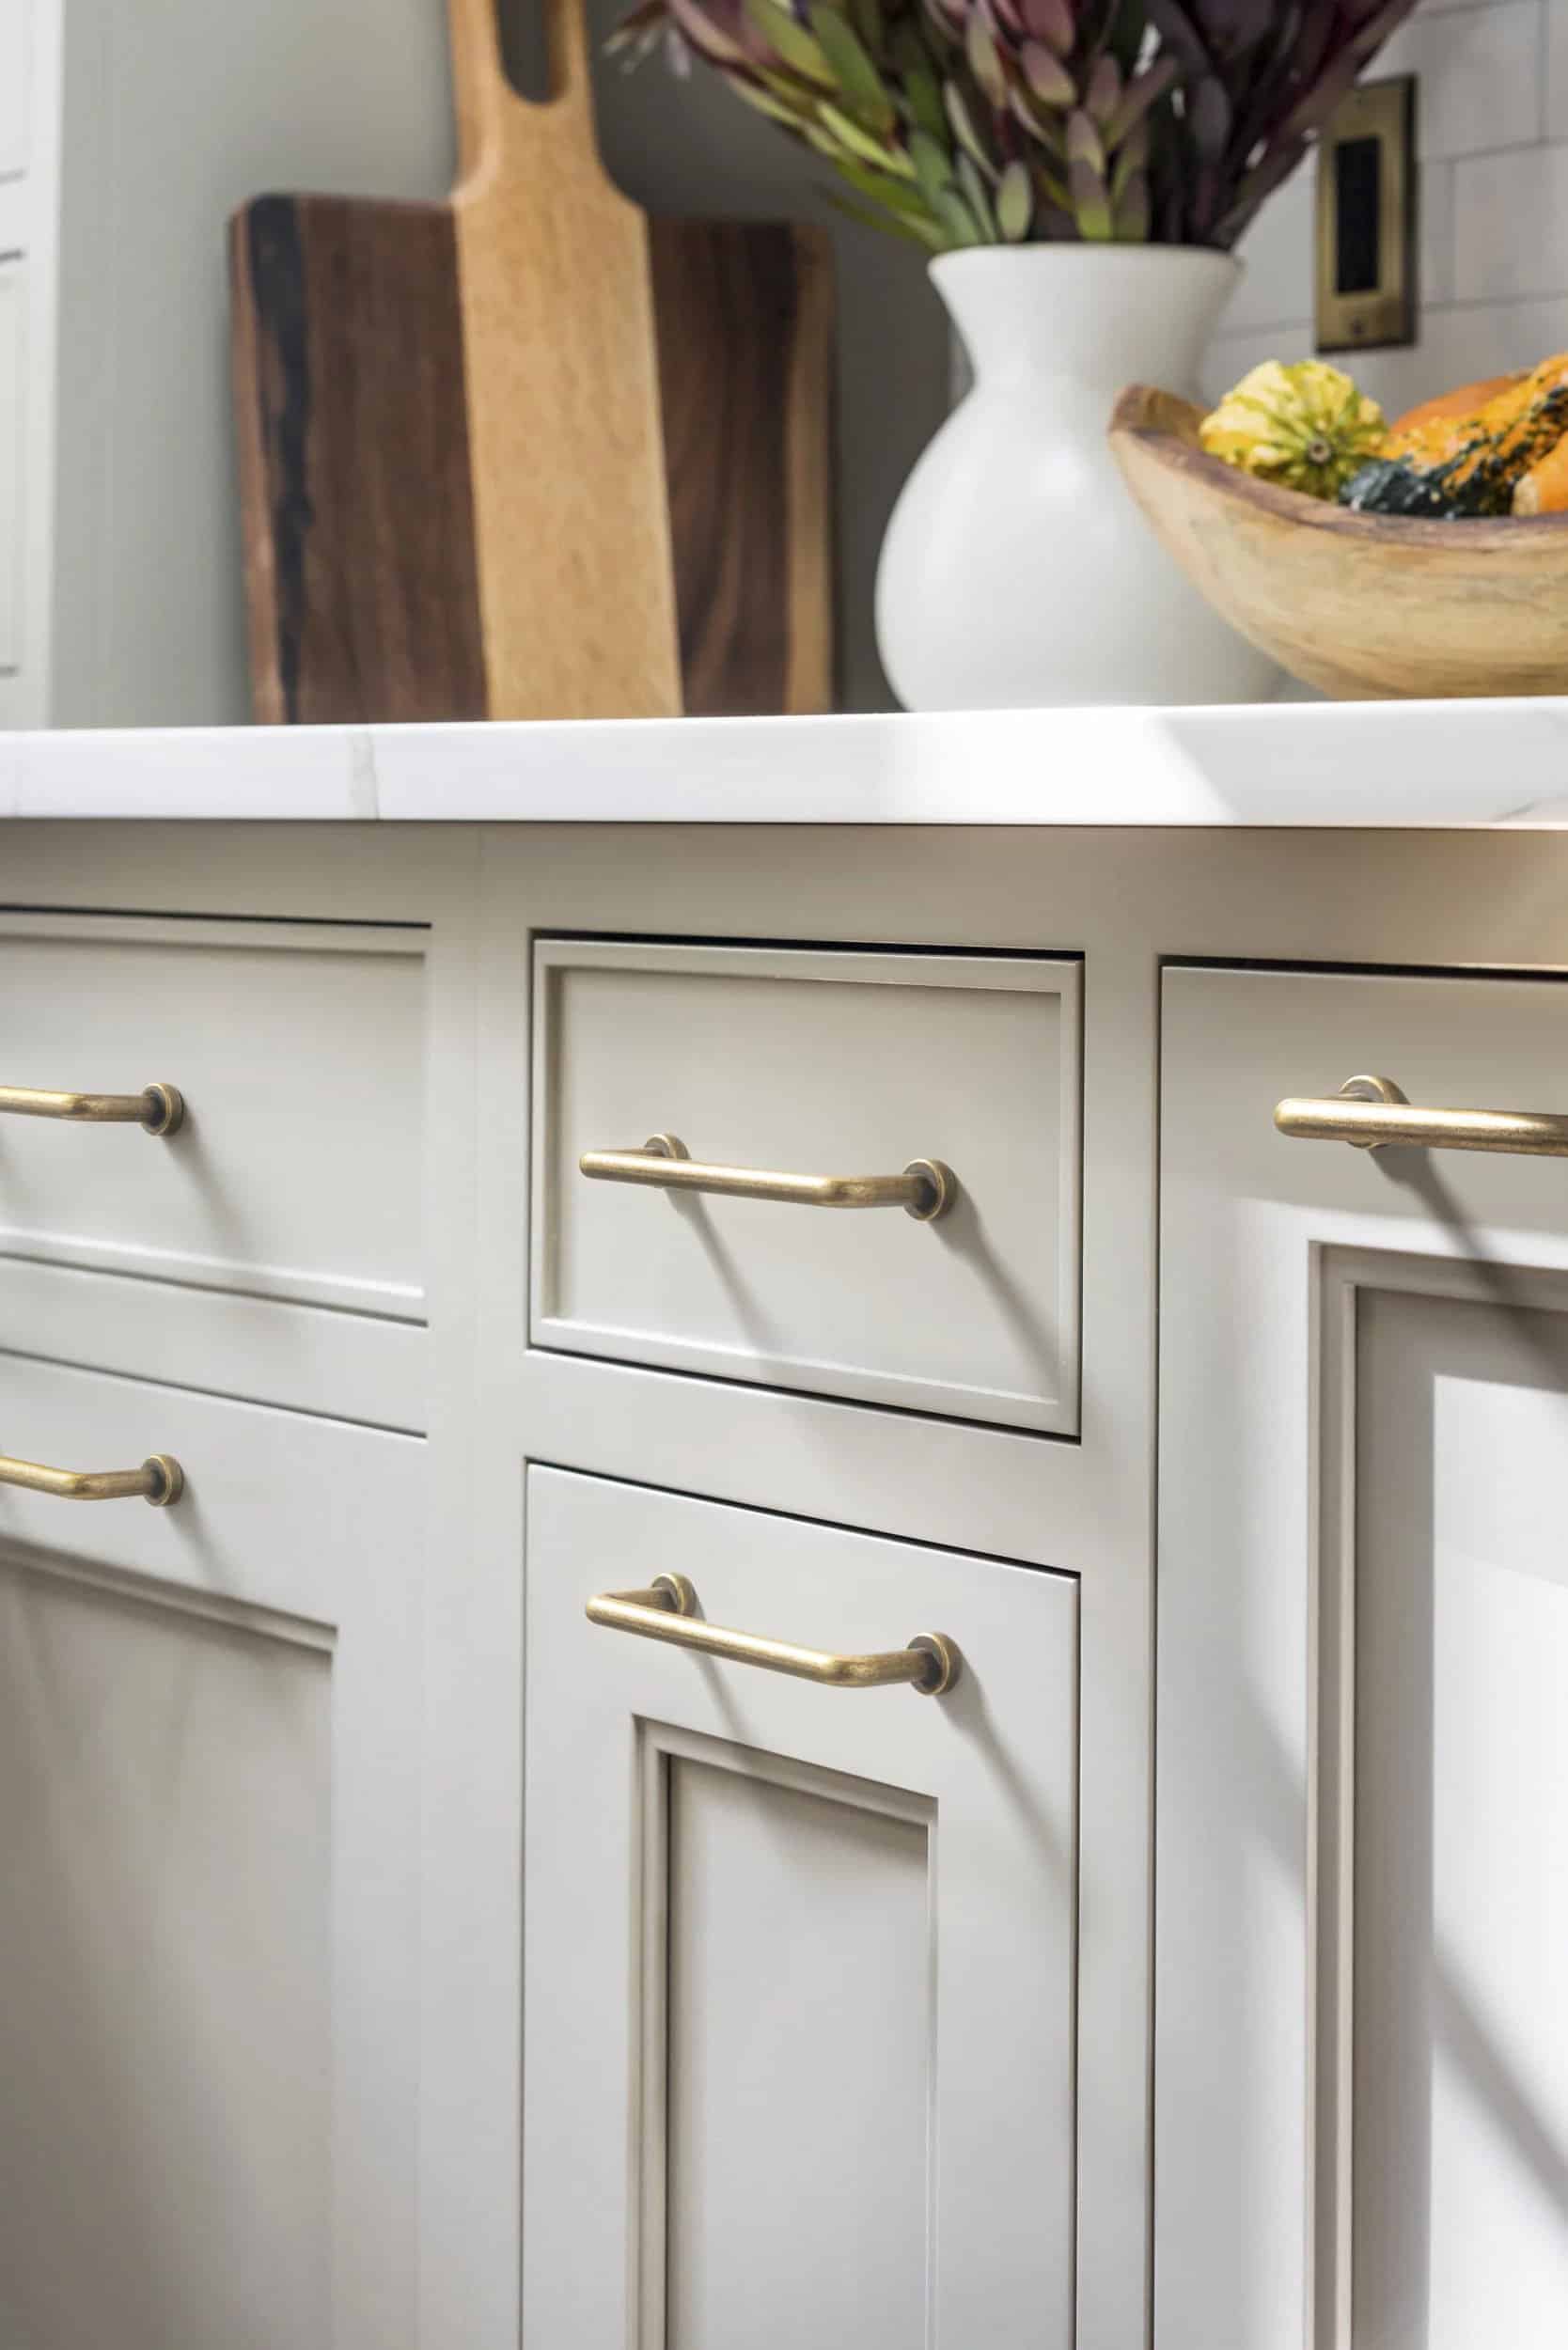 Antique Brass Pulls Will Give Your Kitchen Cabinets That Vintage Look